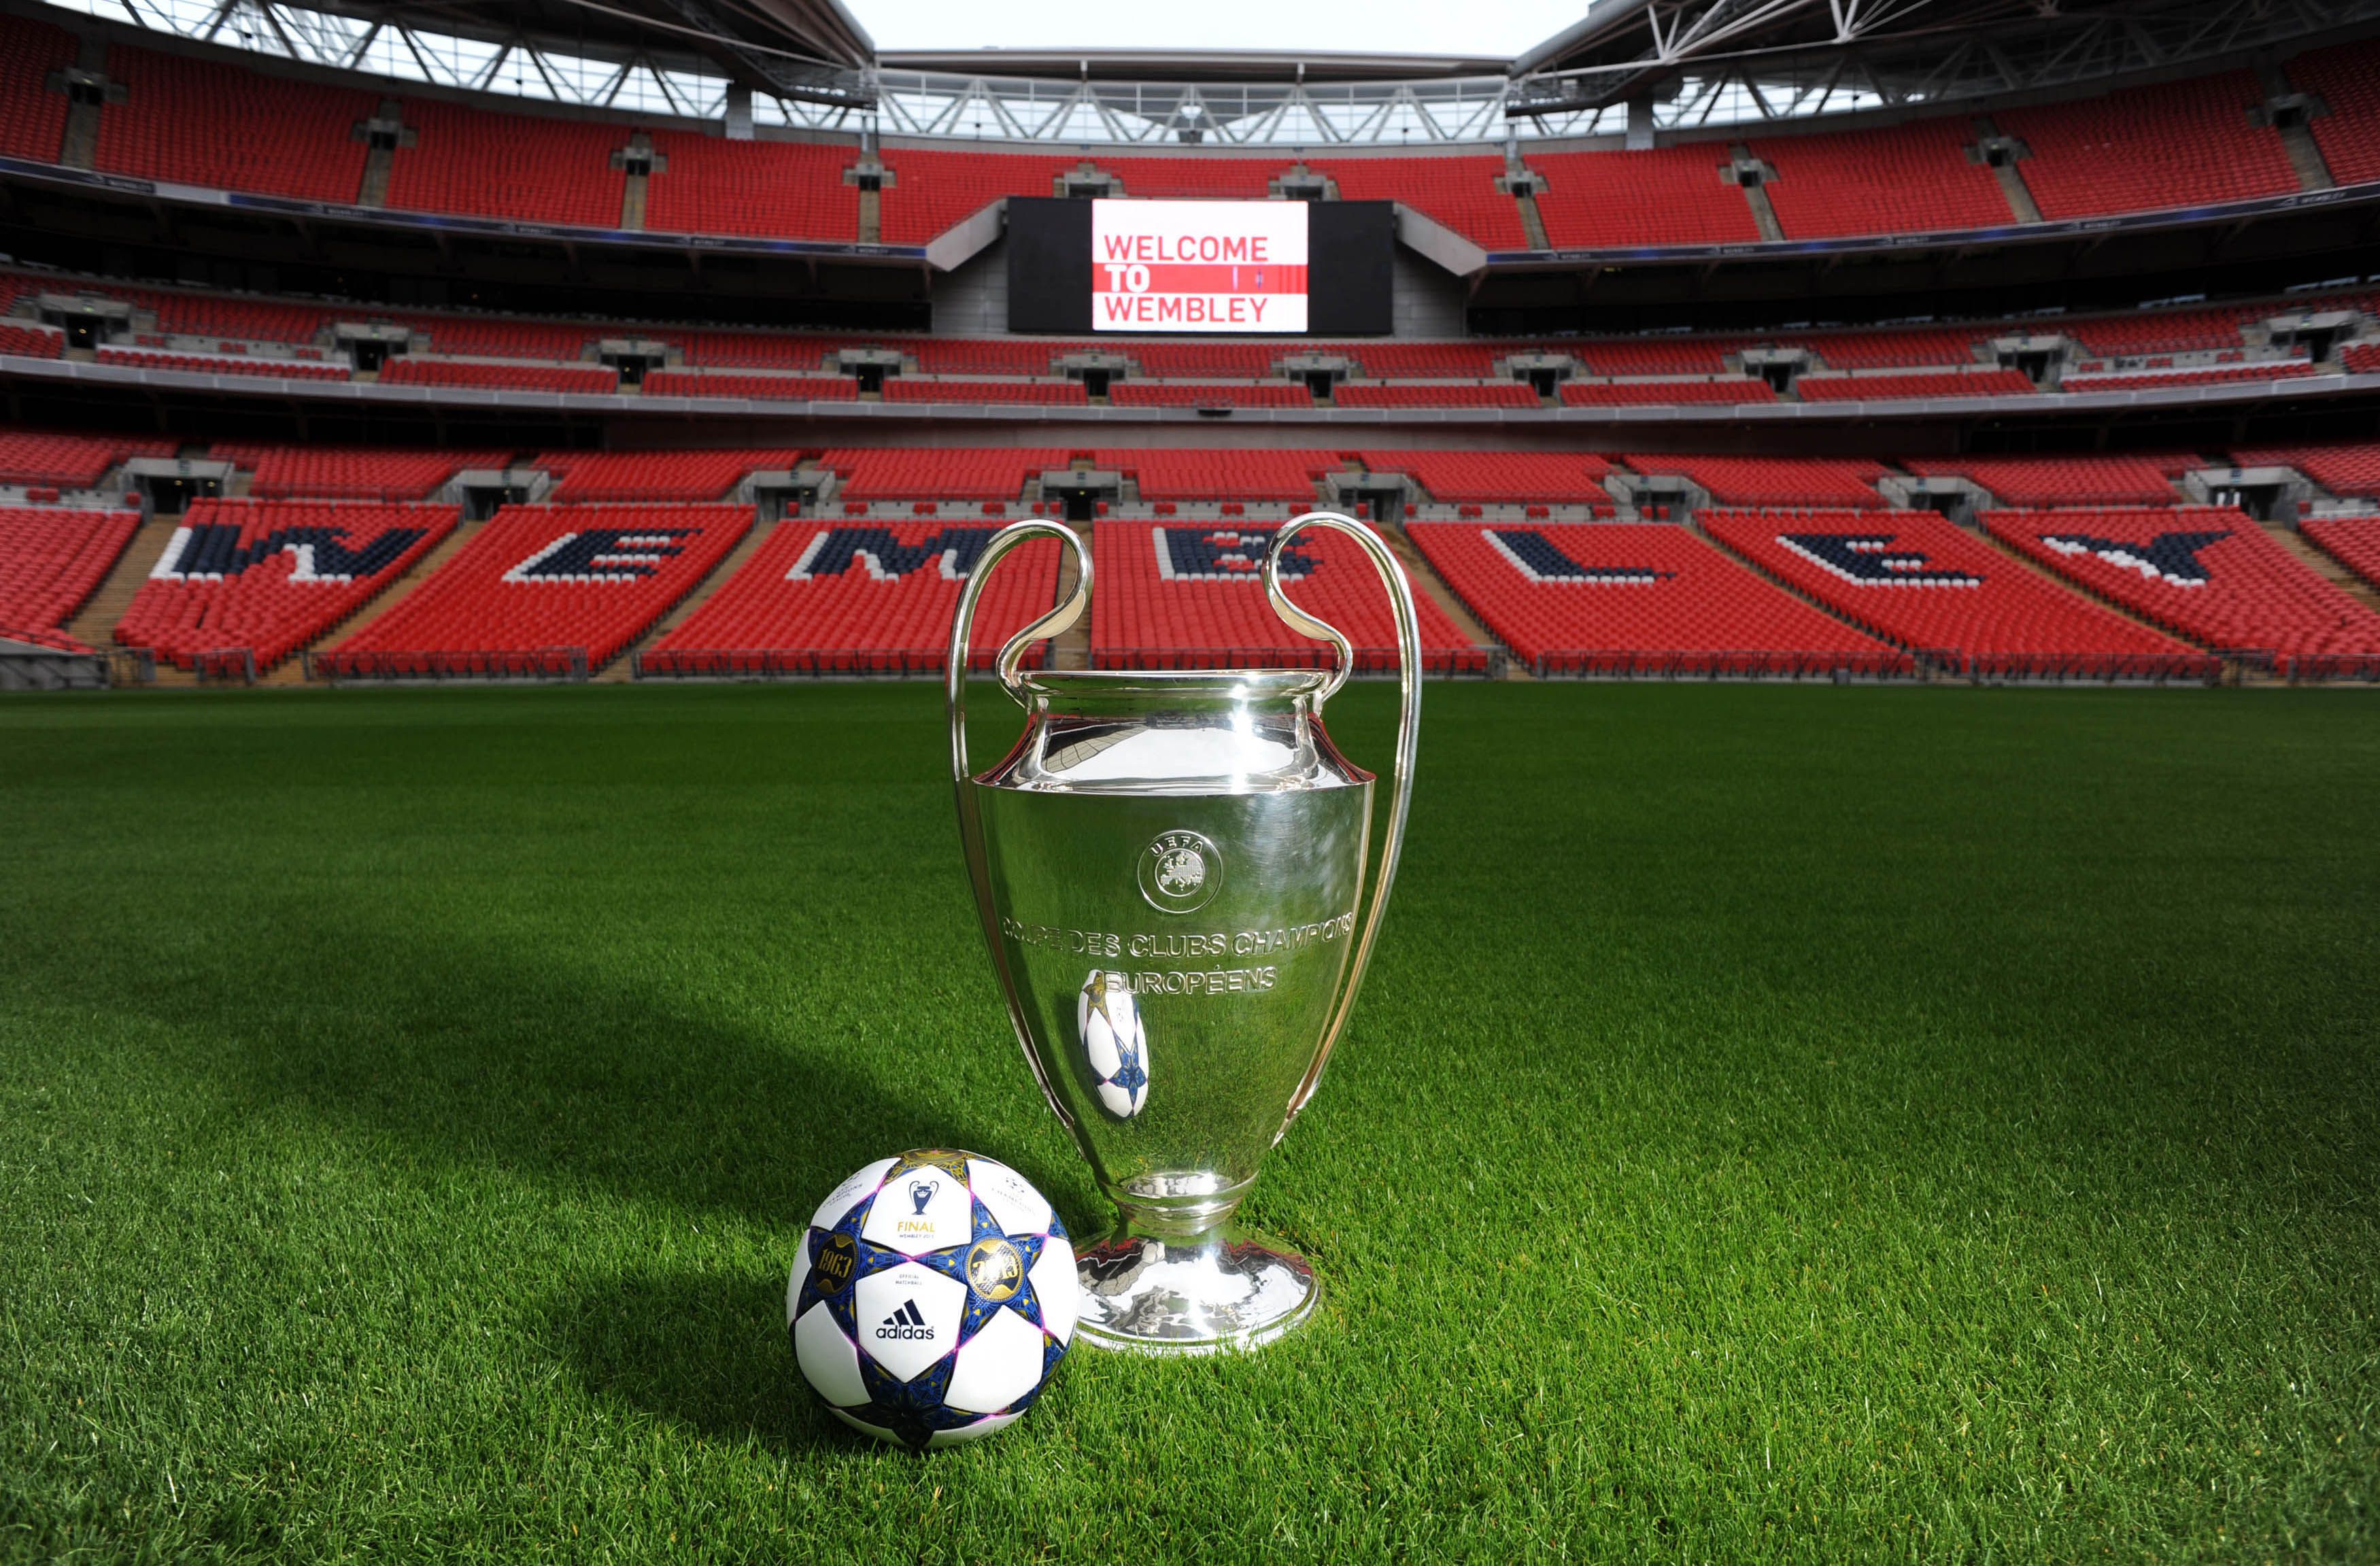 The Launch of the Official Match Ball for the UEFA Champions League Final 2013